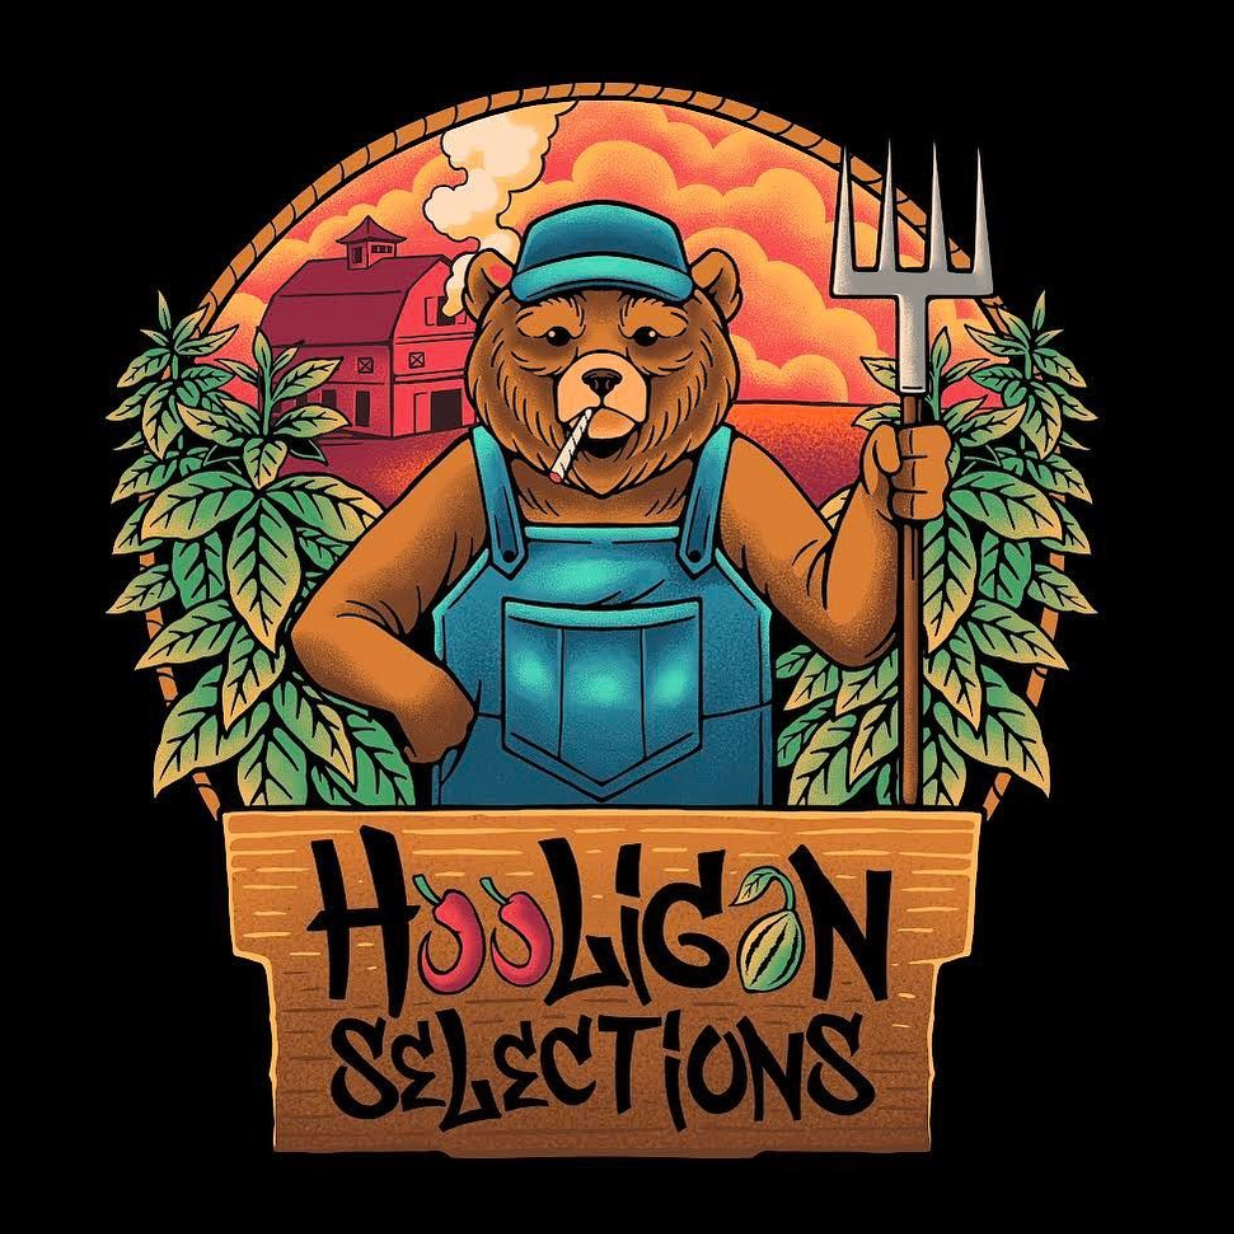 Hooligan Selections - Grass Valley Peaches